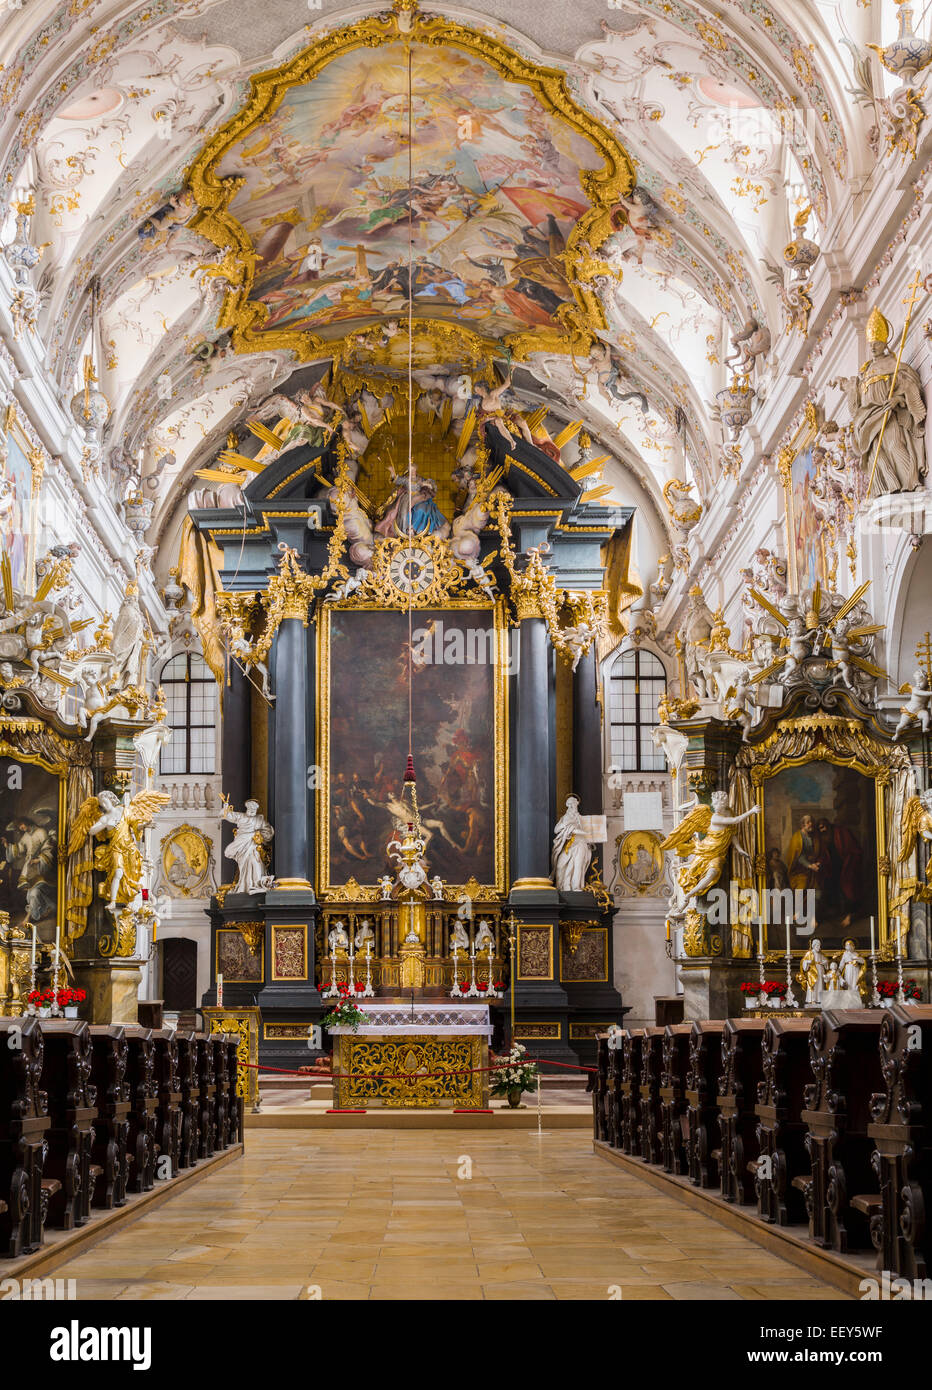 Altar and interior of St Emmeram Abbey or Basilica in Regensburg, Bavaria, Germany Stock Photo